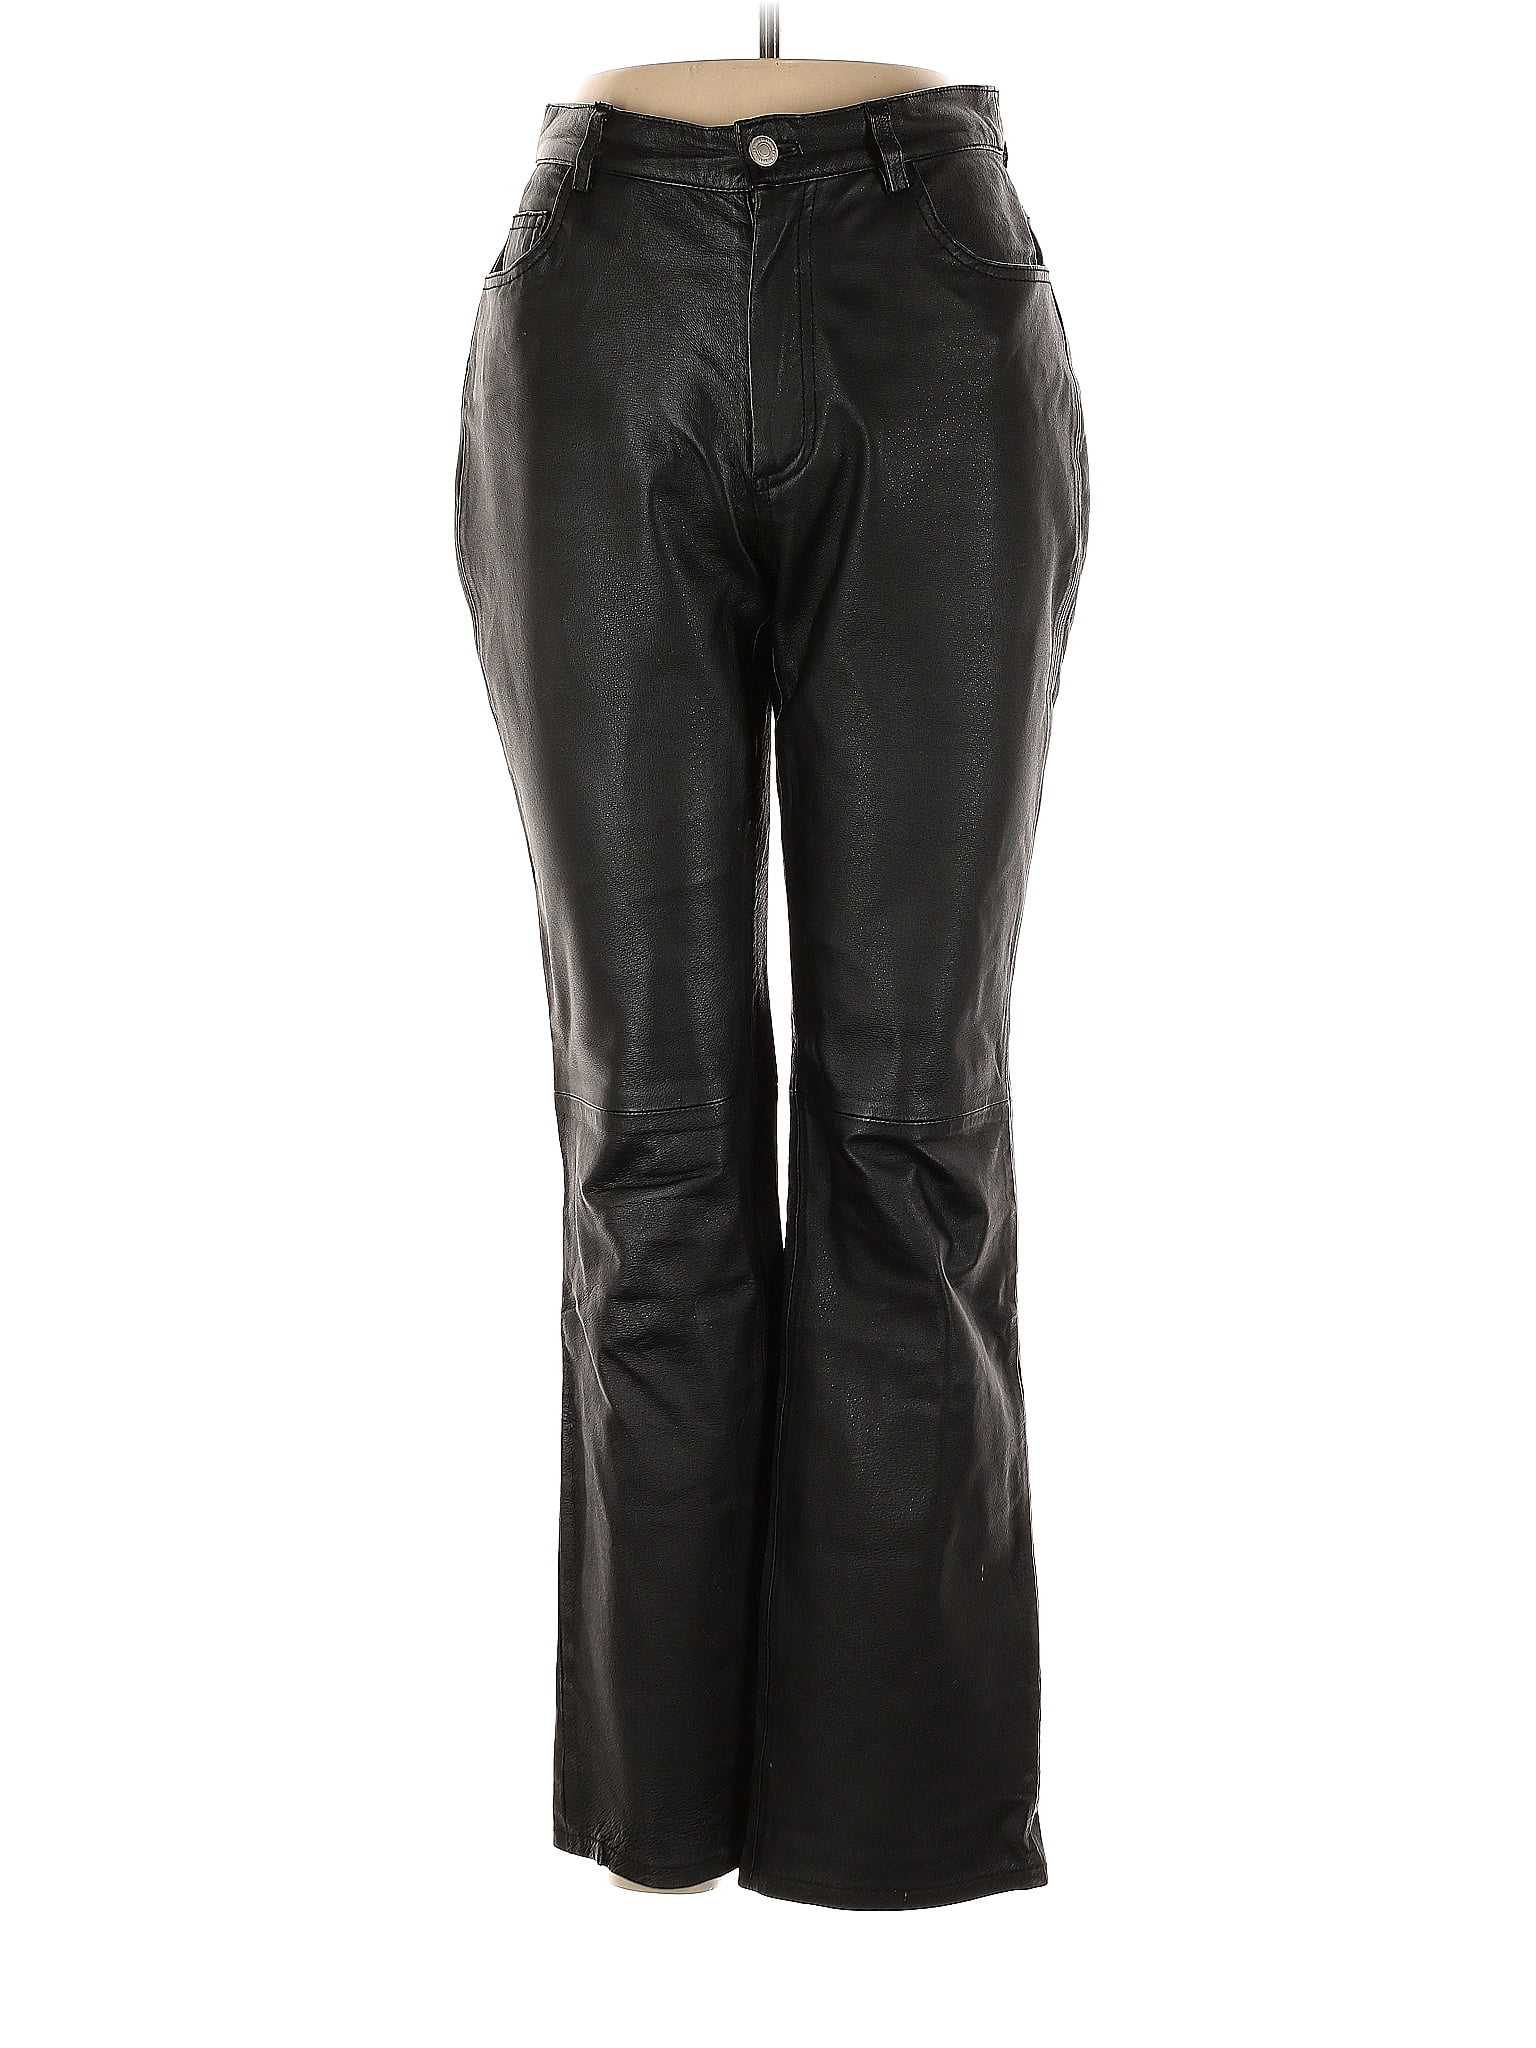 Newport News 100% Leather Black Leather Pants Size 6 - 68% off | thredUP